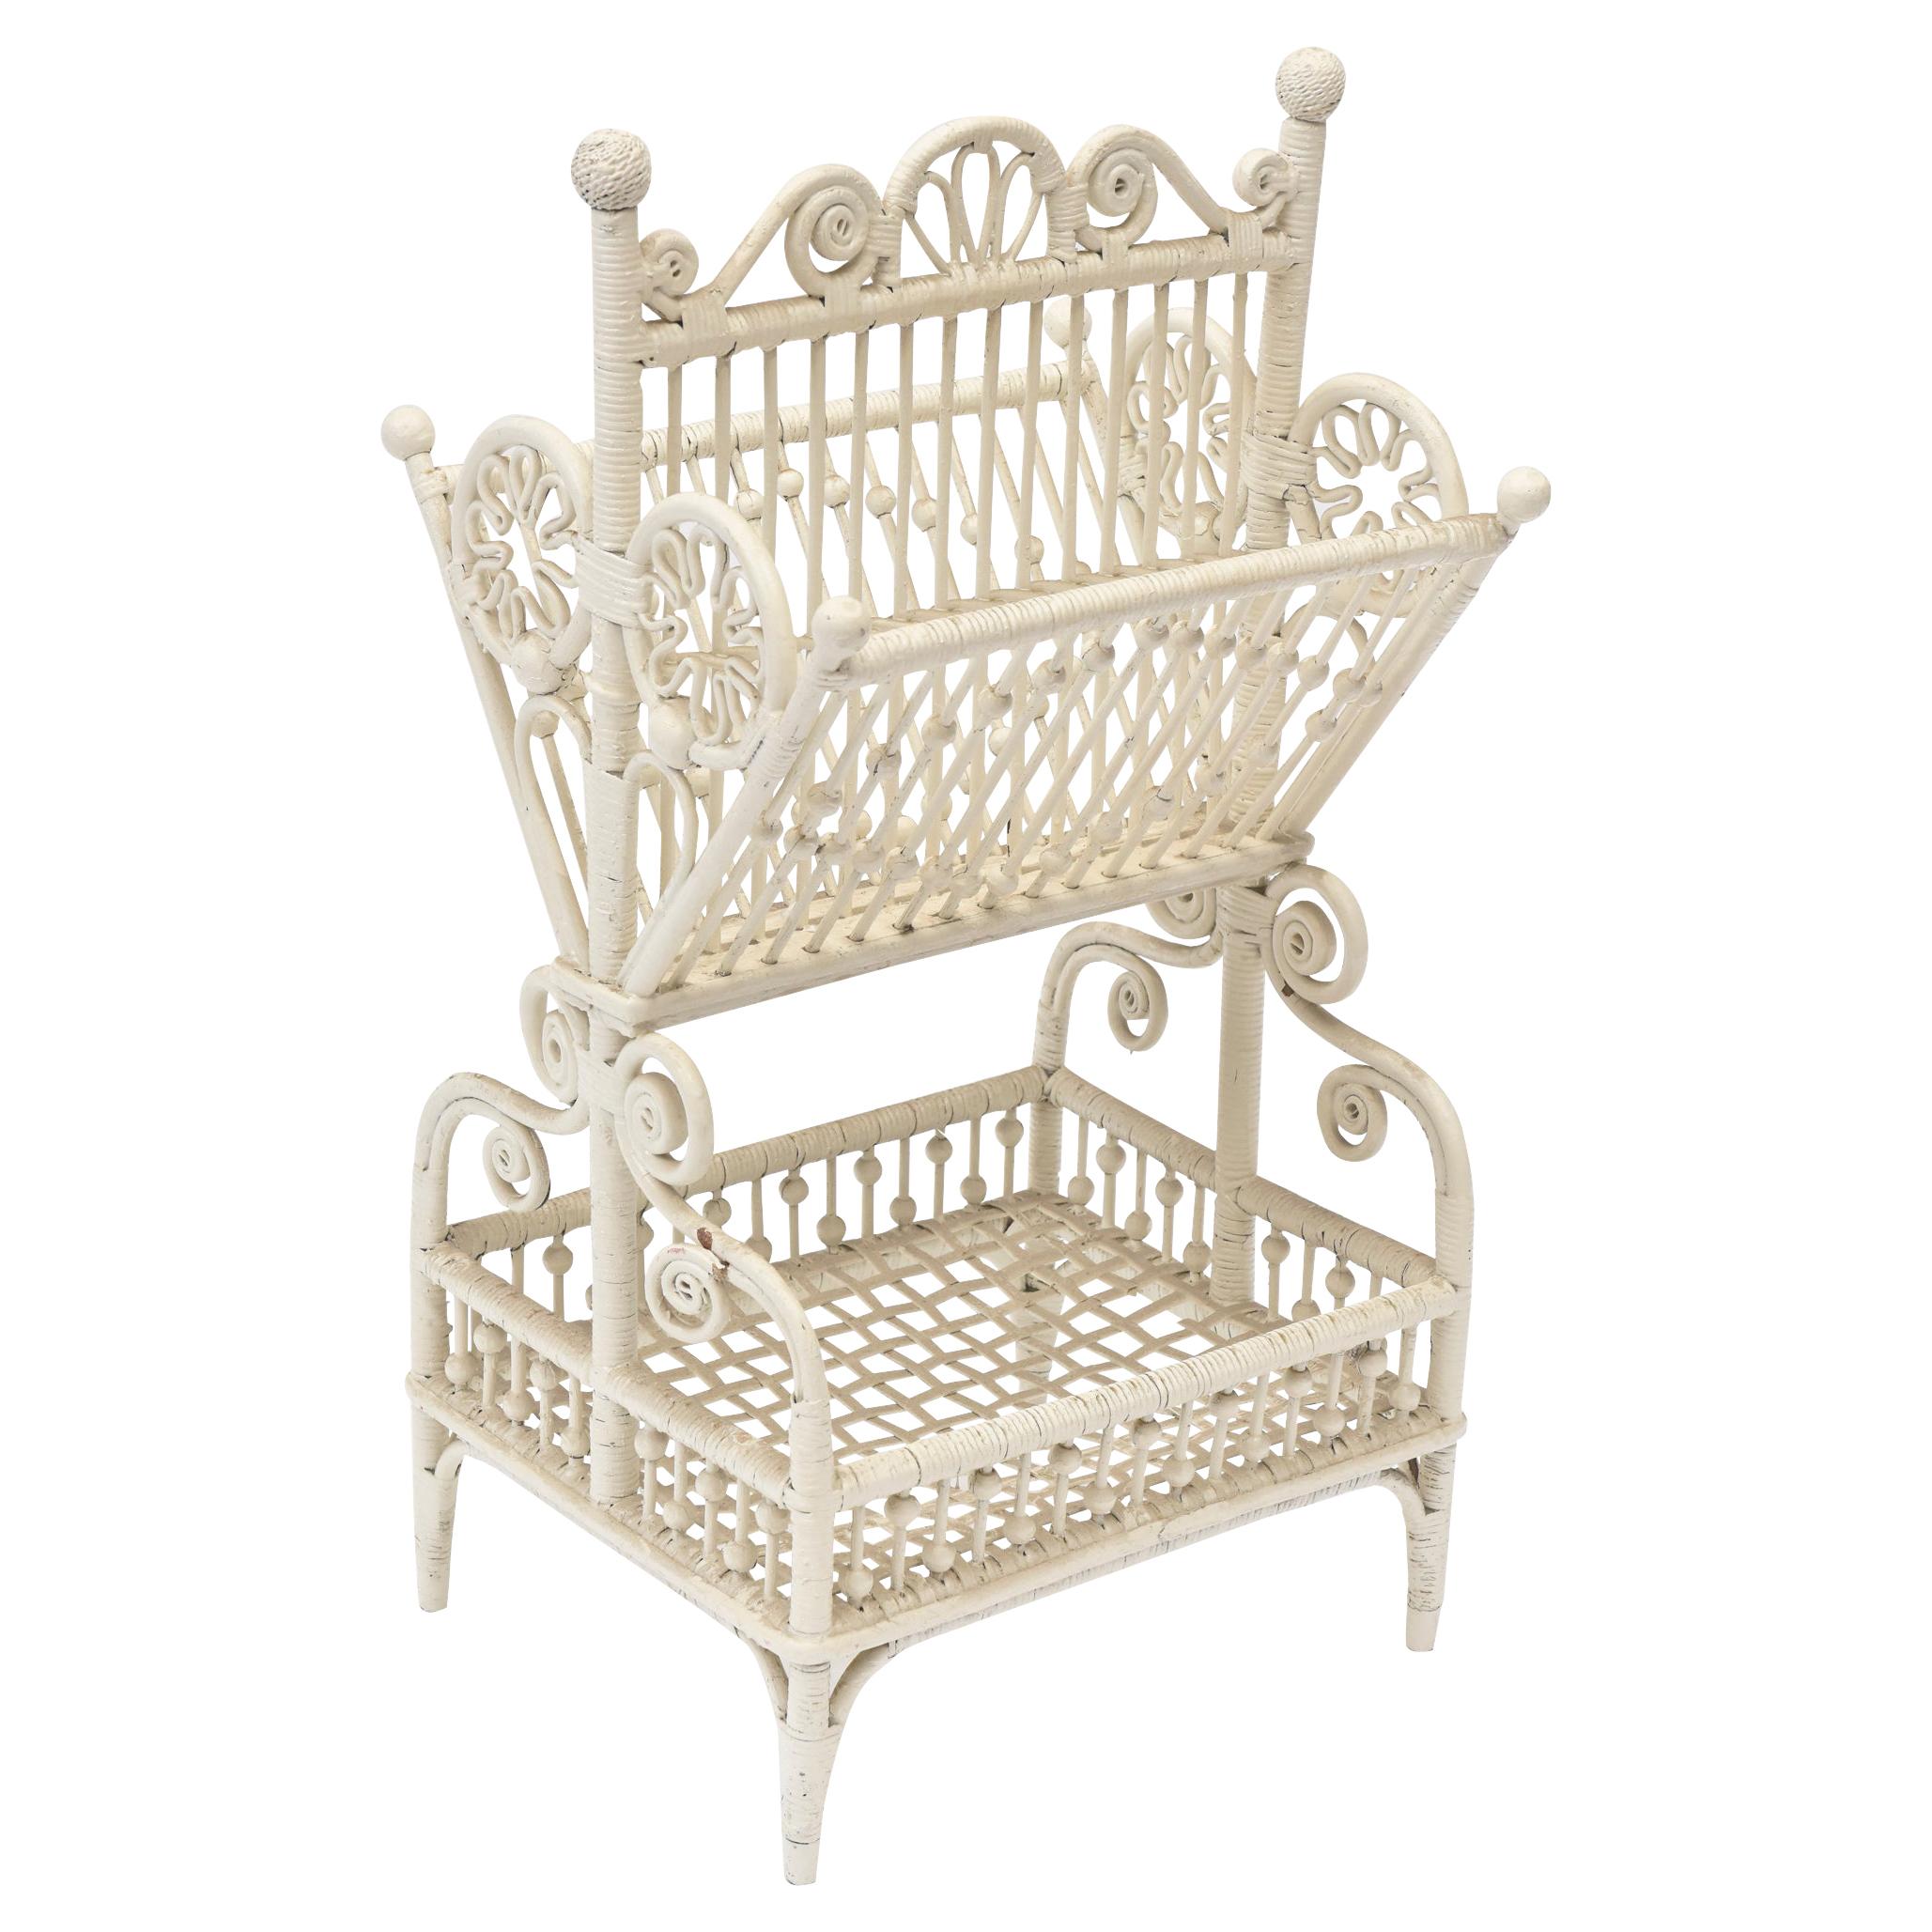 Victorian Wicker Ornate Two Tier Beaded Magazine Rack For Sale